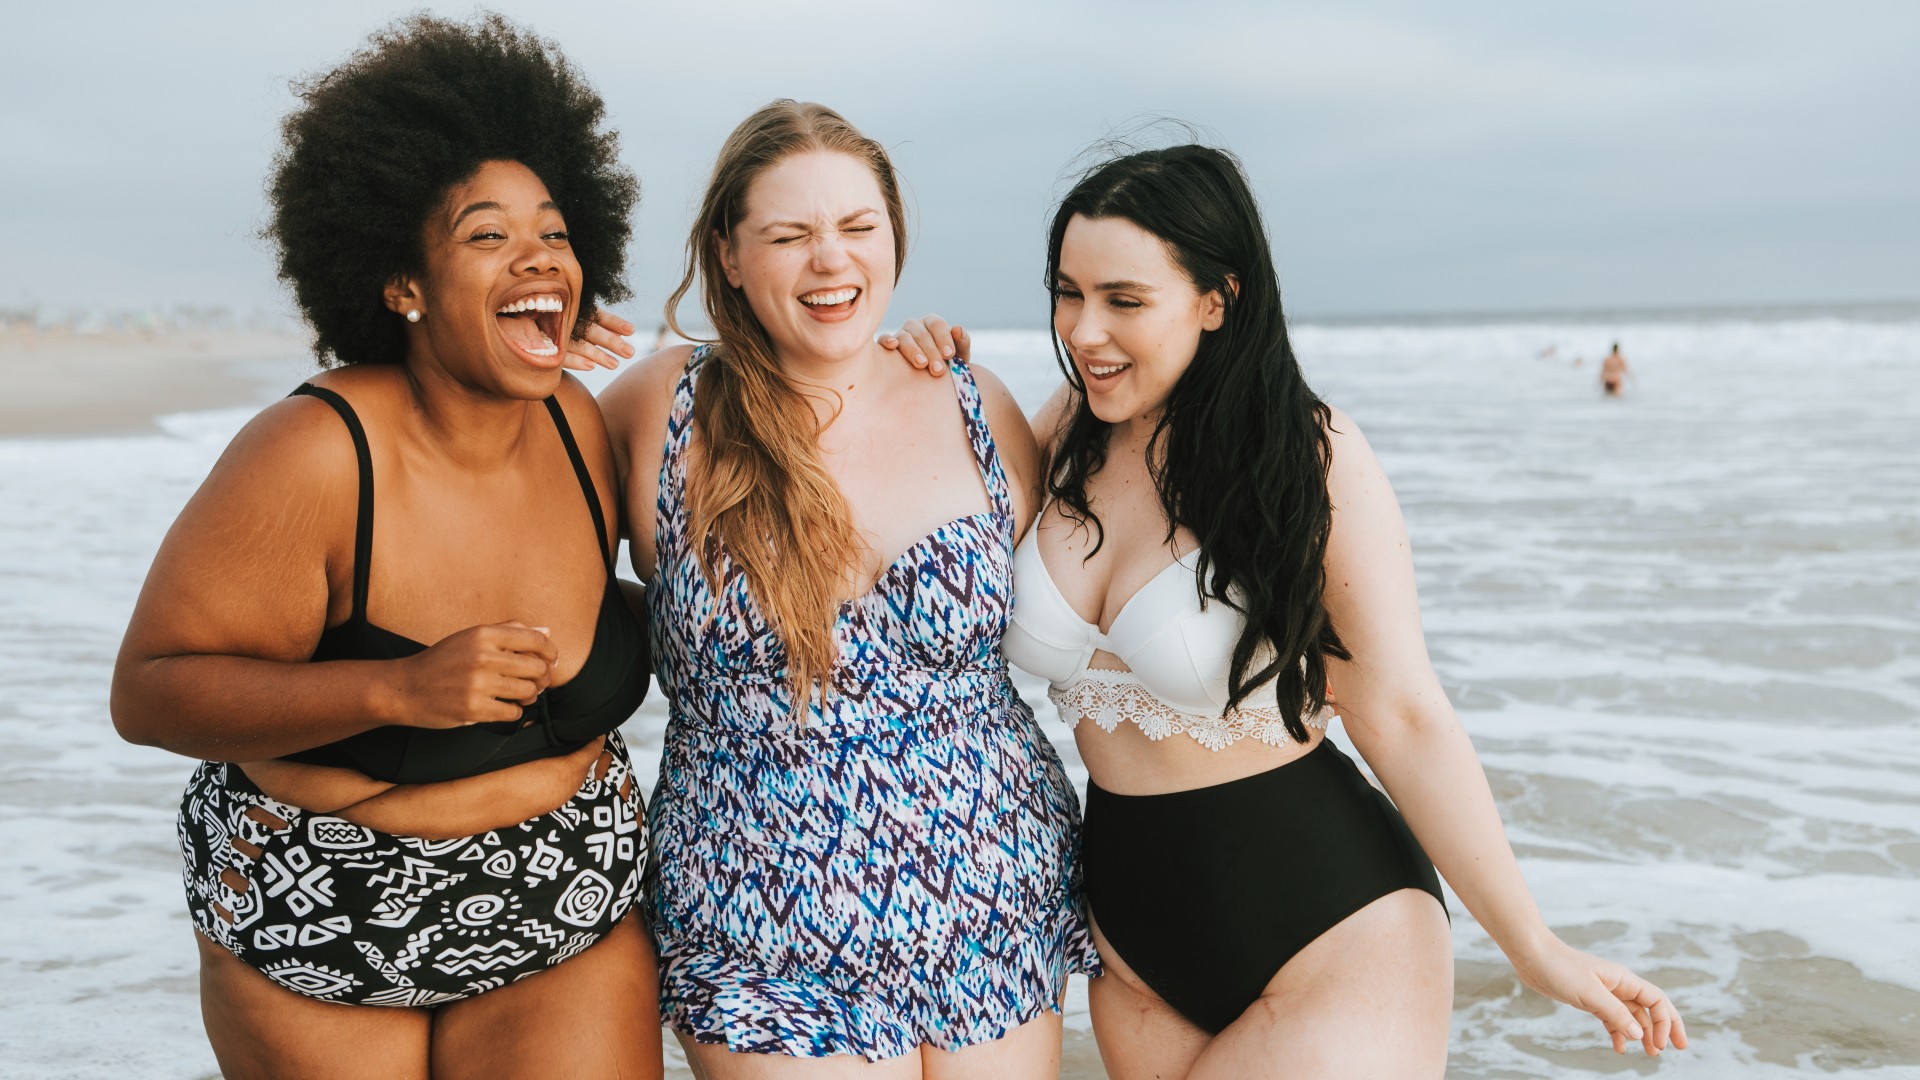 THE BEST SWIMWEAR FOR YOUR BODY TYPE - PERSONAL STYLIST TIPS - One